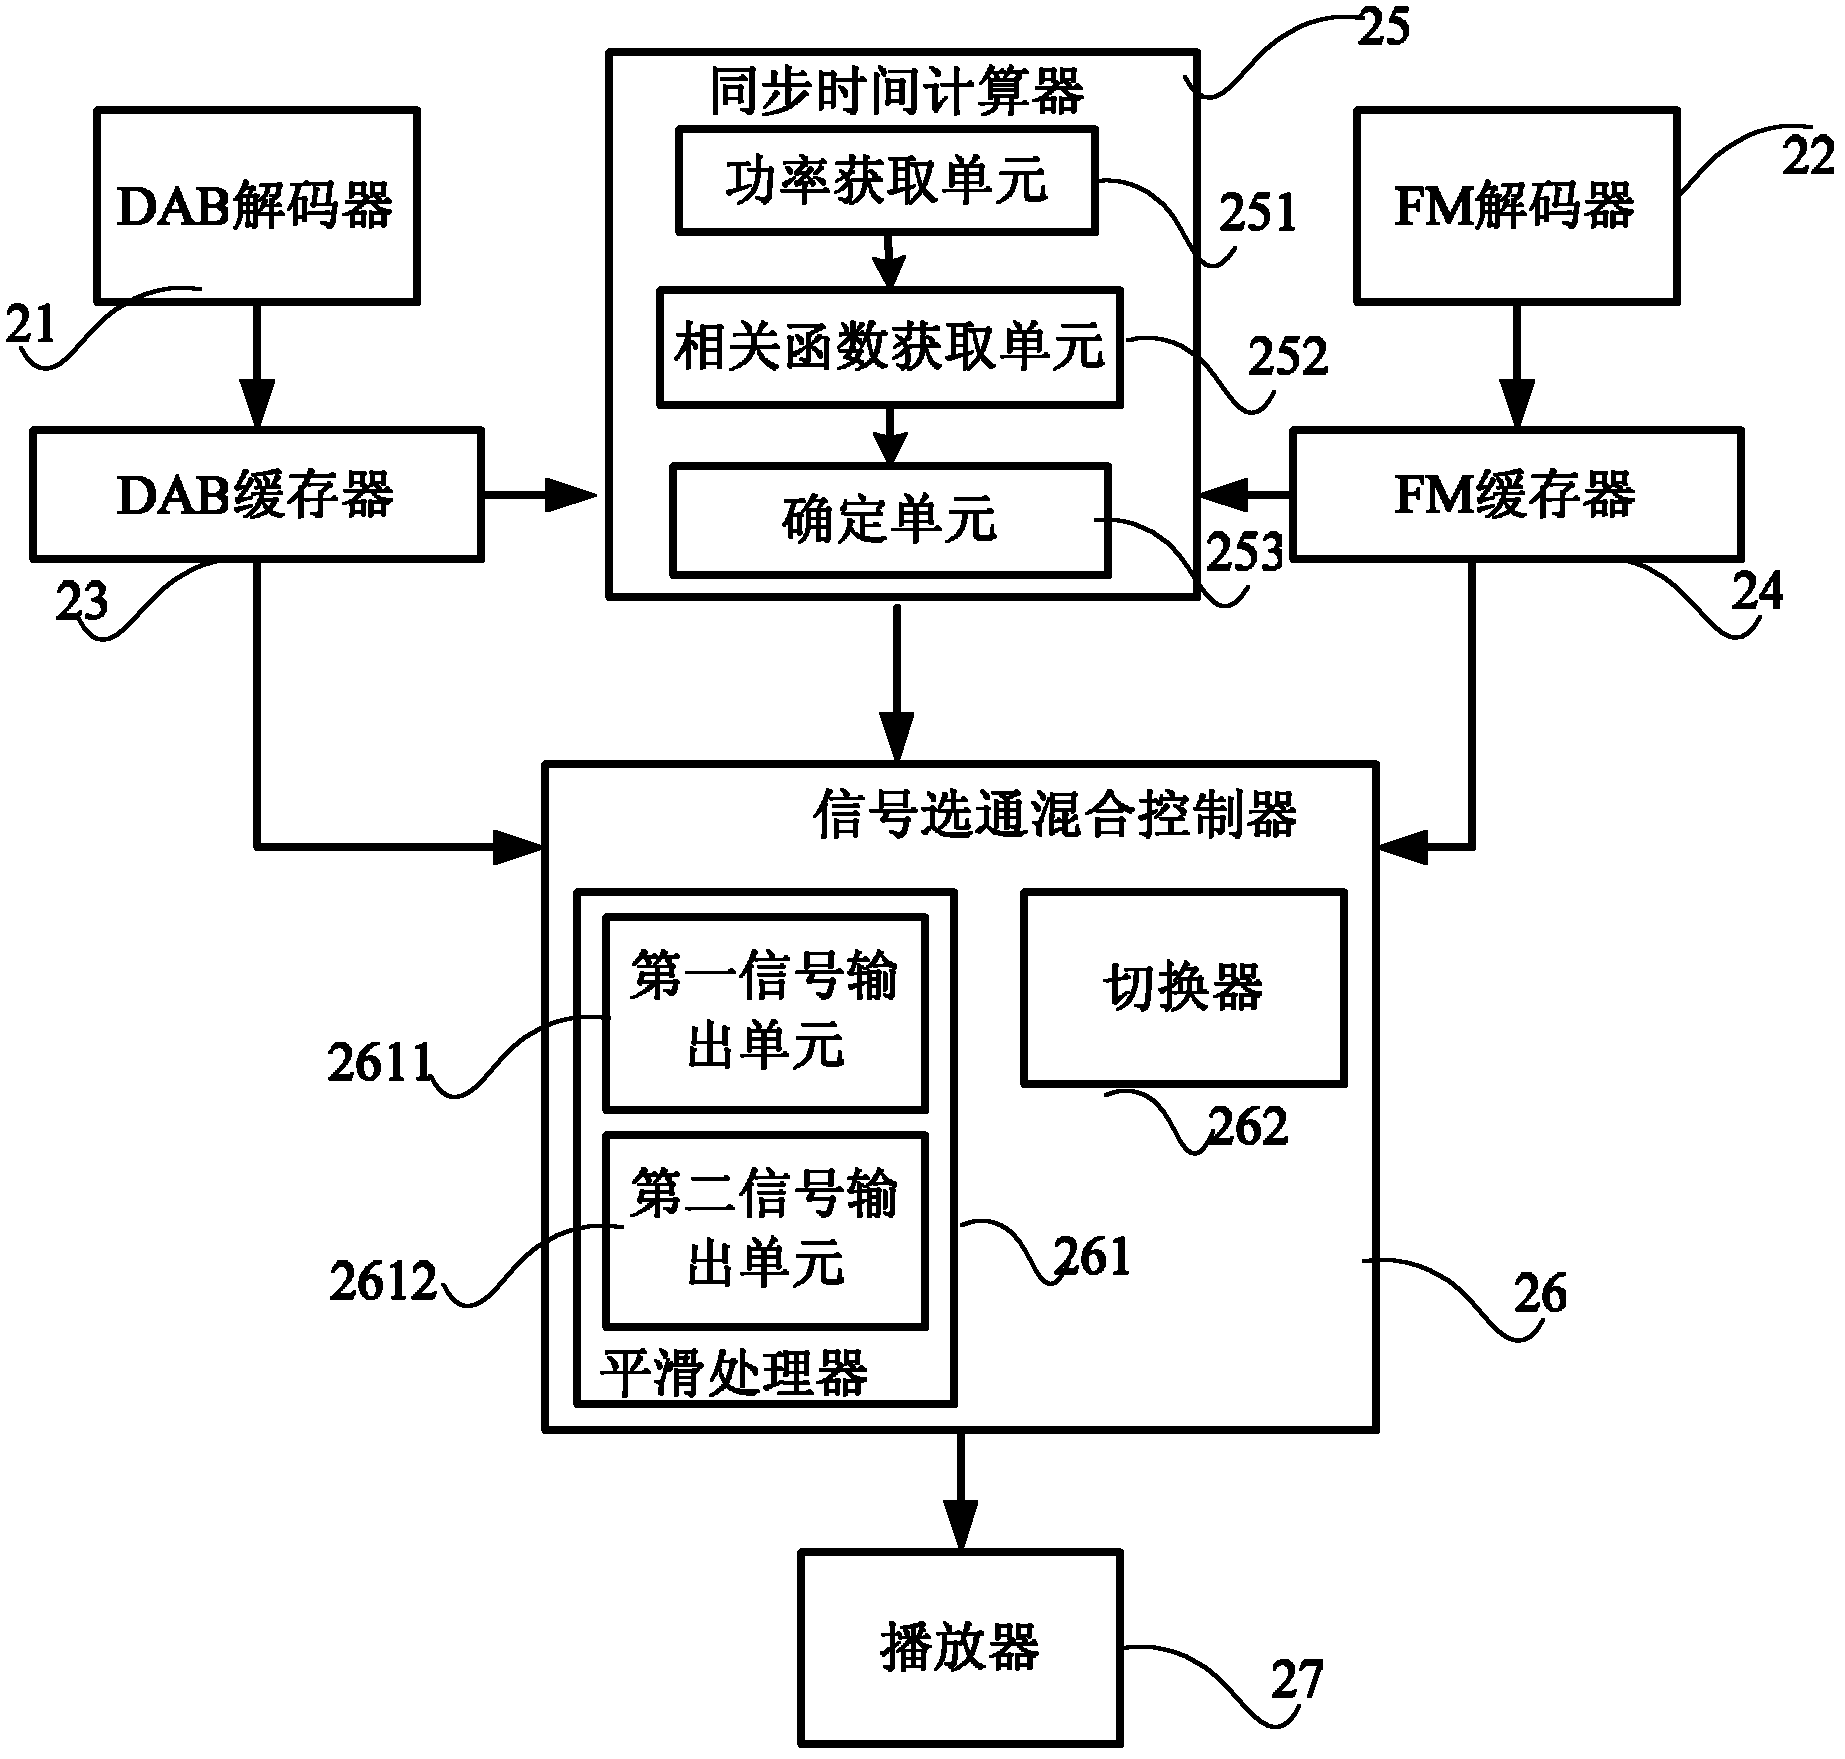 Method and device for automatically switching digital audio broadcasting (DAB) signal and frequency modulation (FM) signal